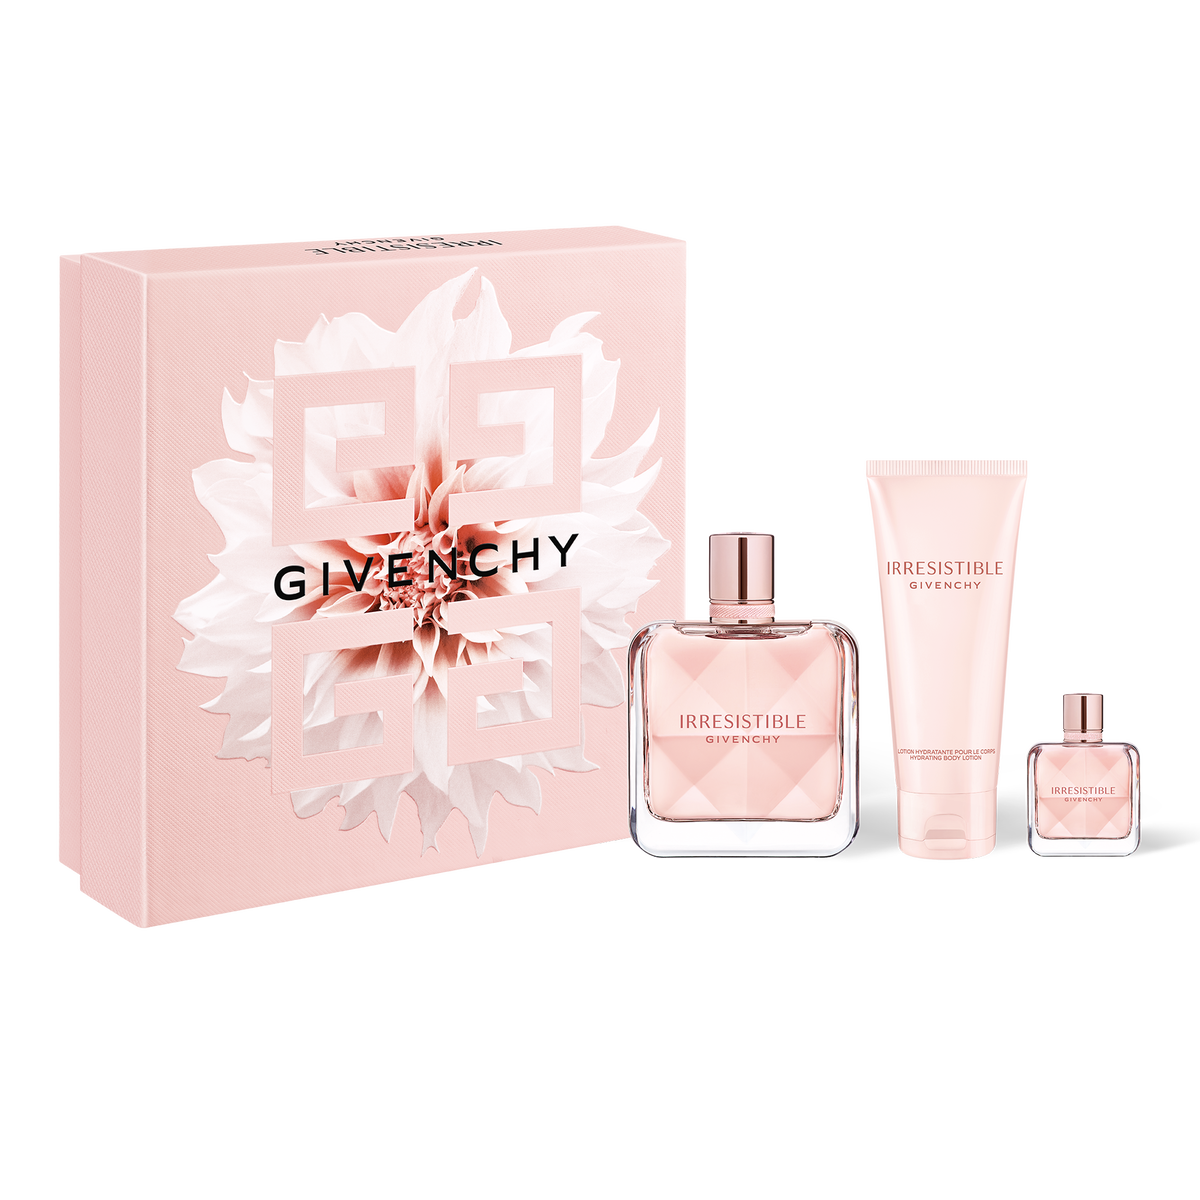 GIVENCHY IRRESISTIBLE– VALENTINE’S DAY GIFT SET